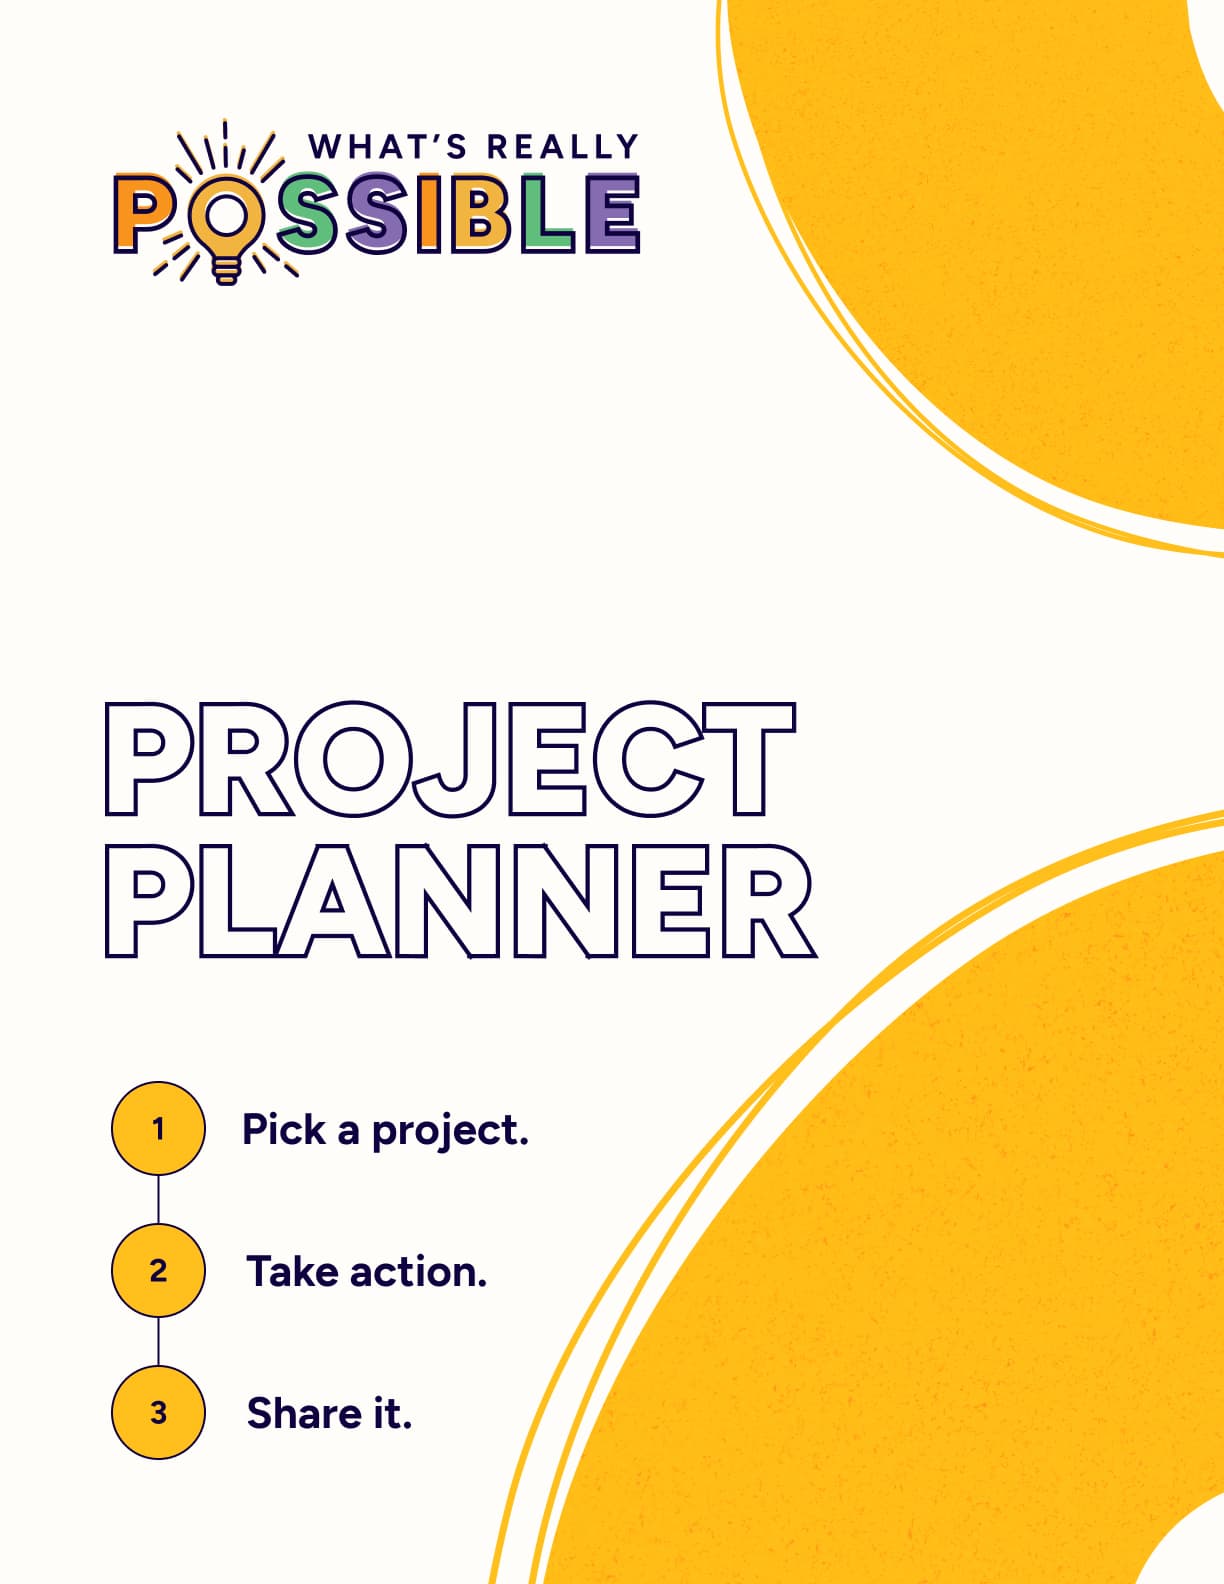 whats-really-possible-planner-cover